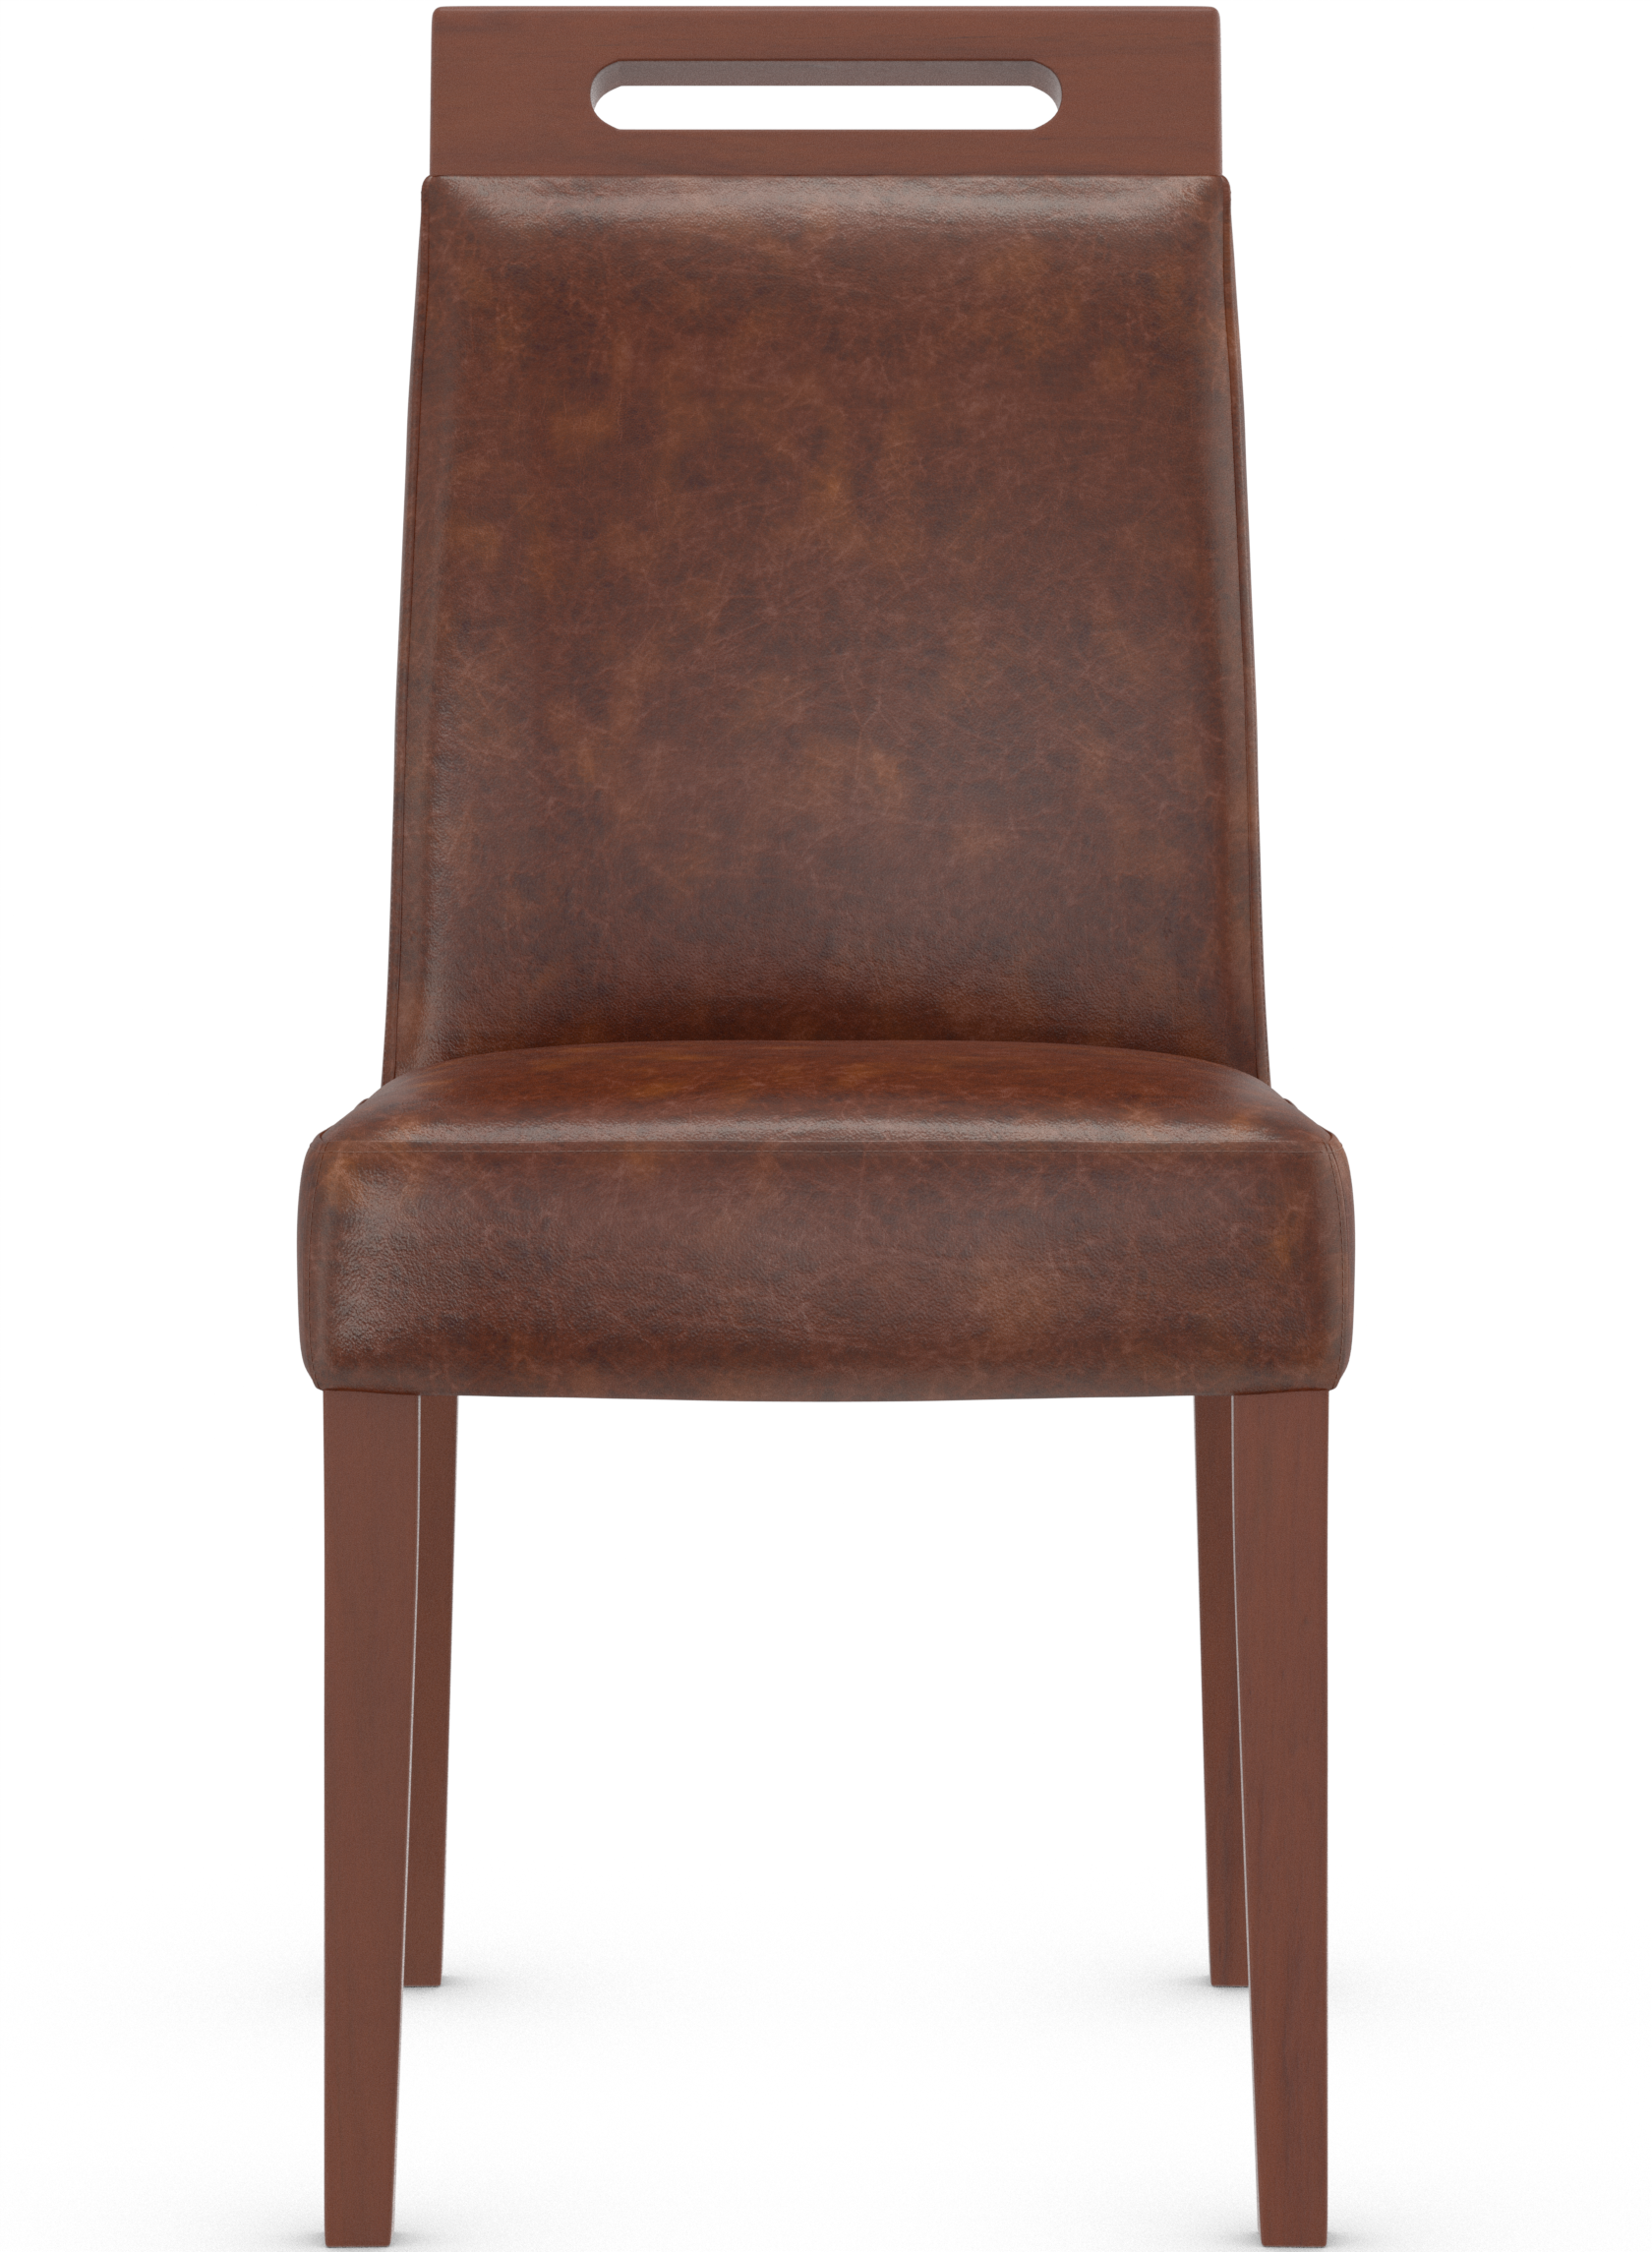 Modena Chestnut Dining Chair Fabric